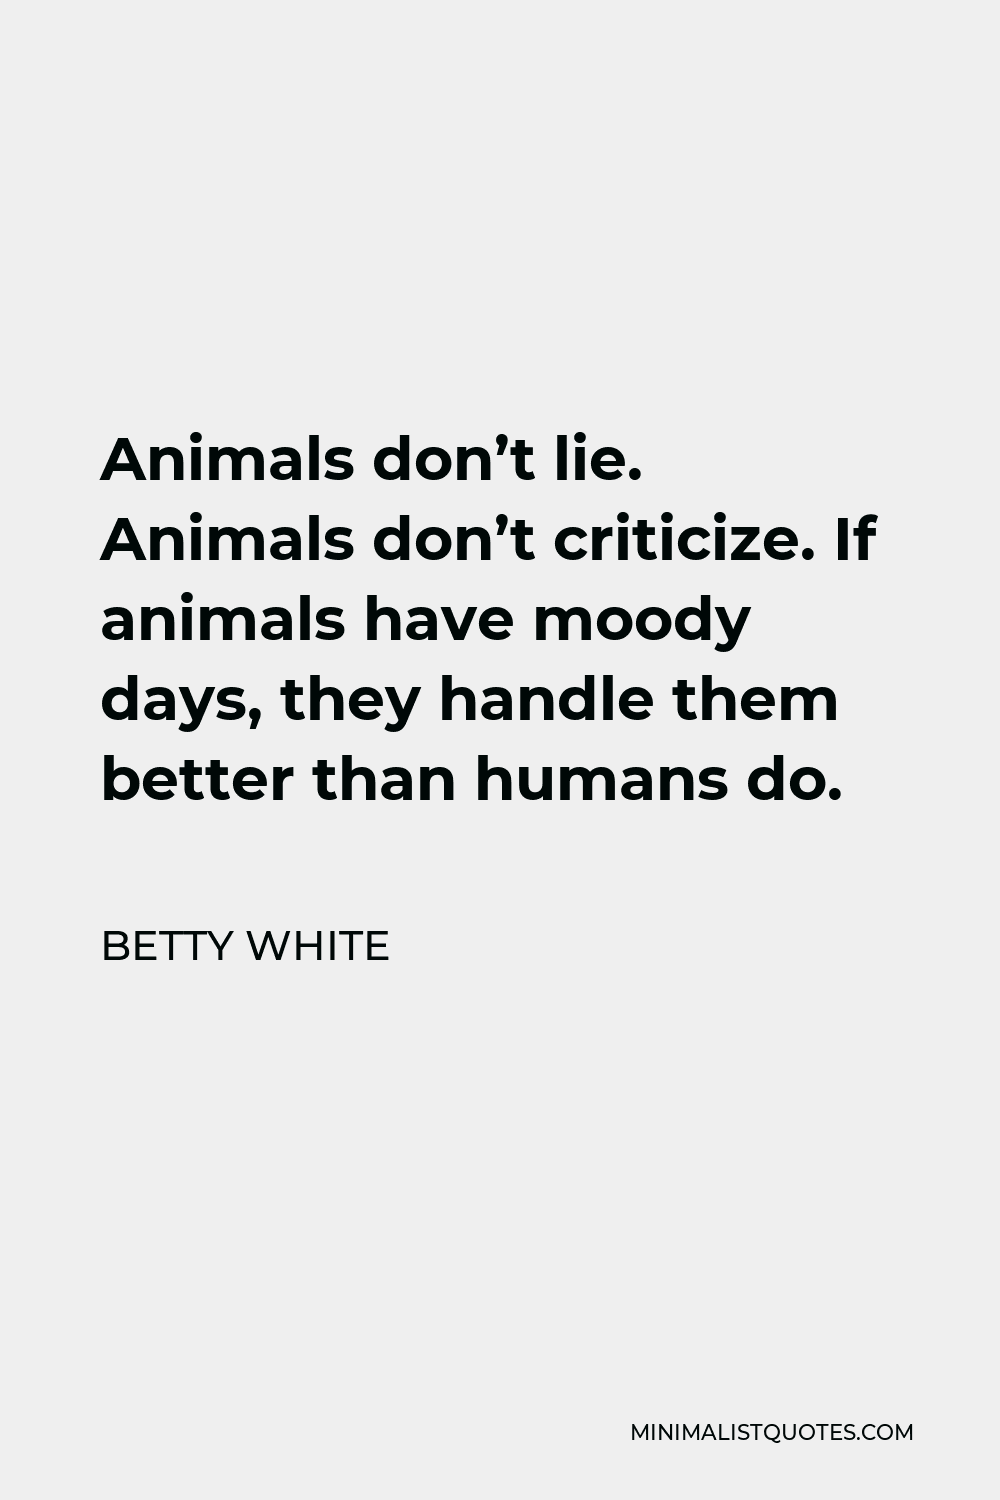 Betty White Quote - Animals don’t lie. Animals don’t criticize. If animals have moody days, they handle them better than humans do.